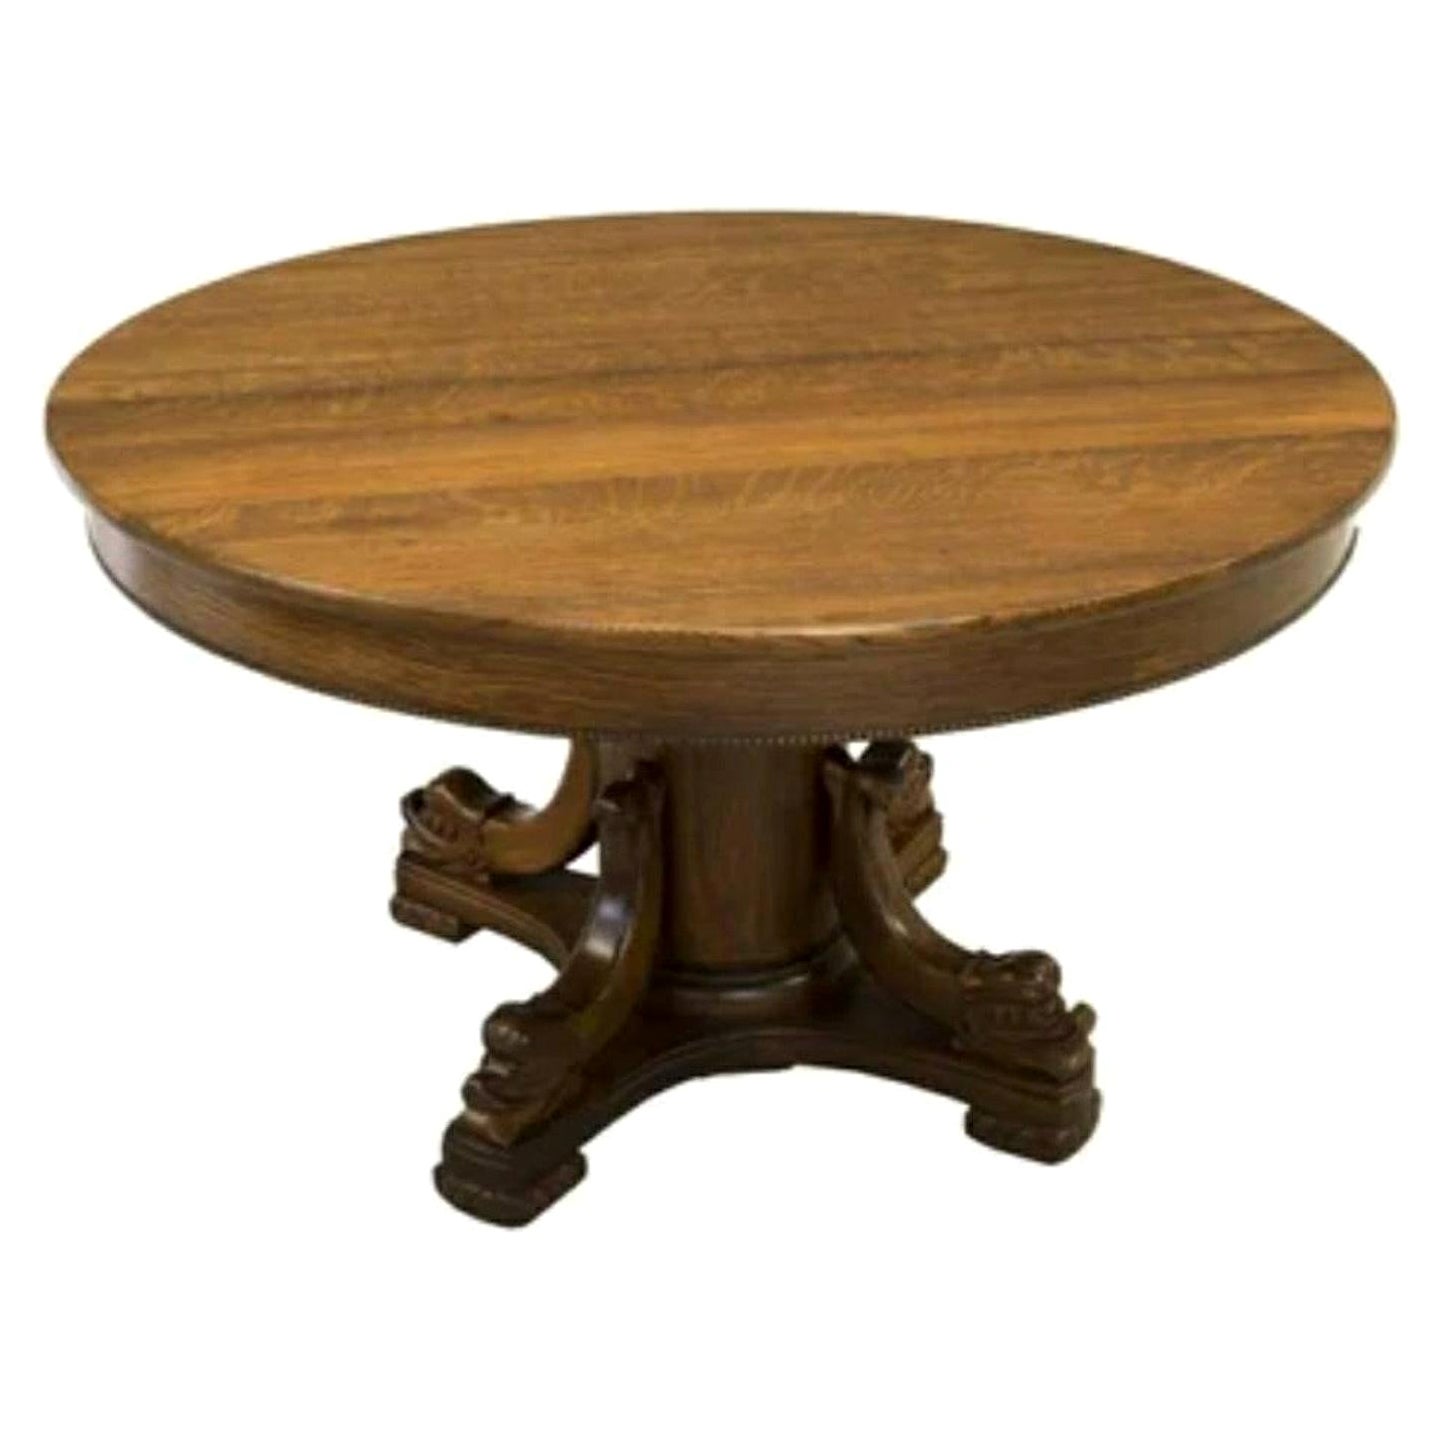 Antique American Pedestal Figural Carved Extension Dining Table For Sale